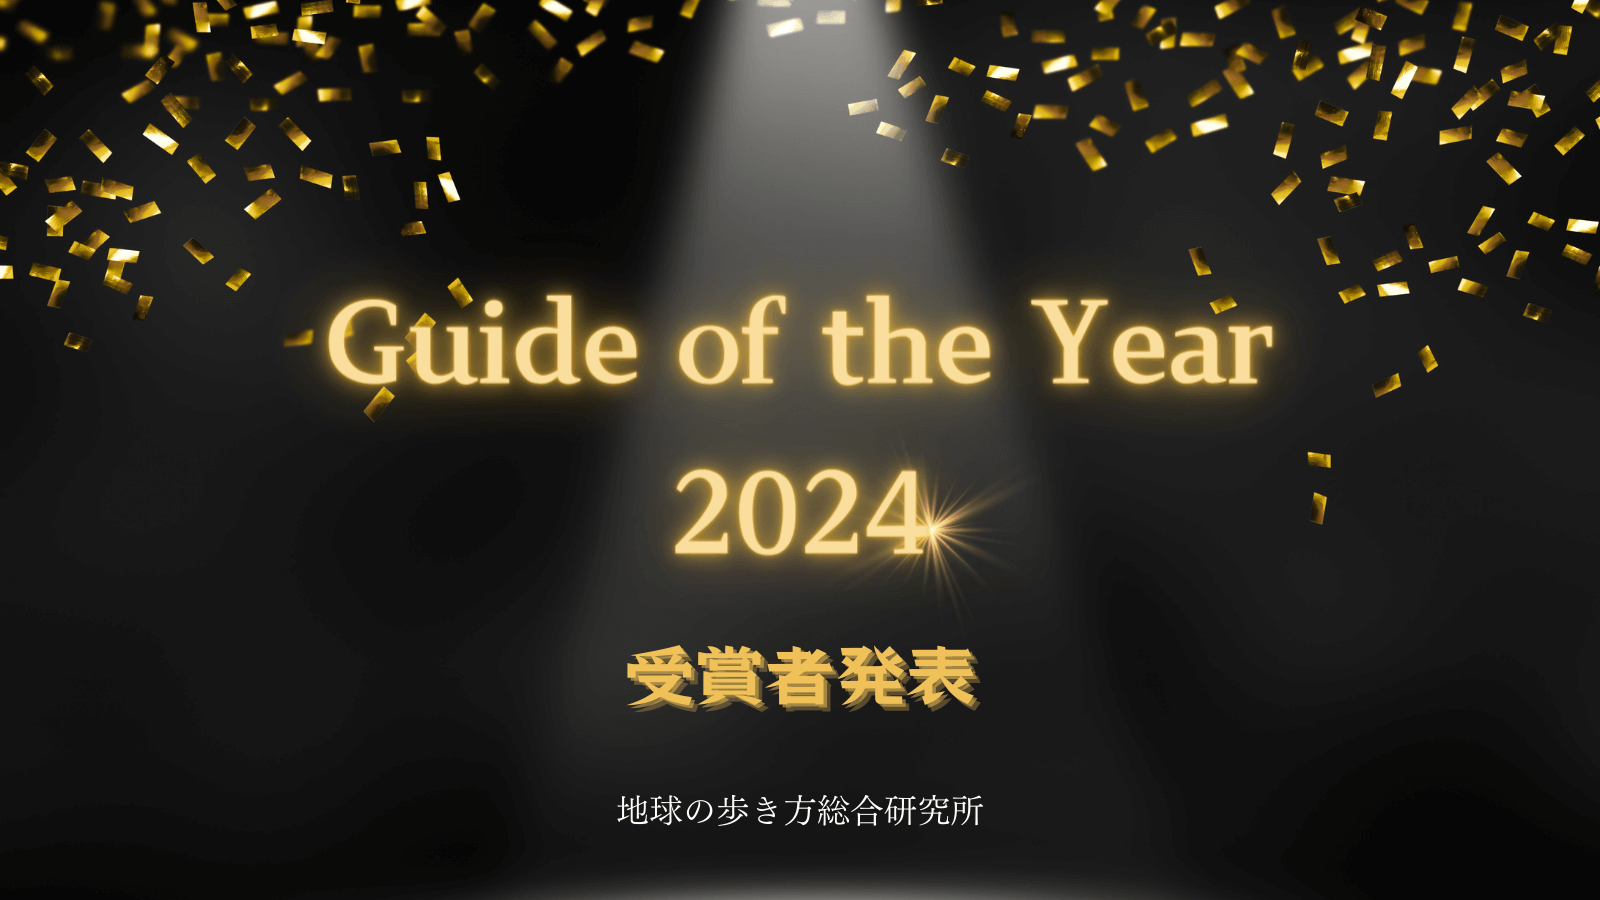 『Guide of the Year 2024』受賞者発表　画像